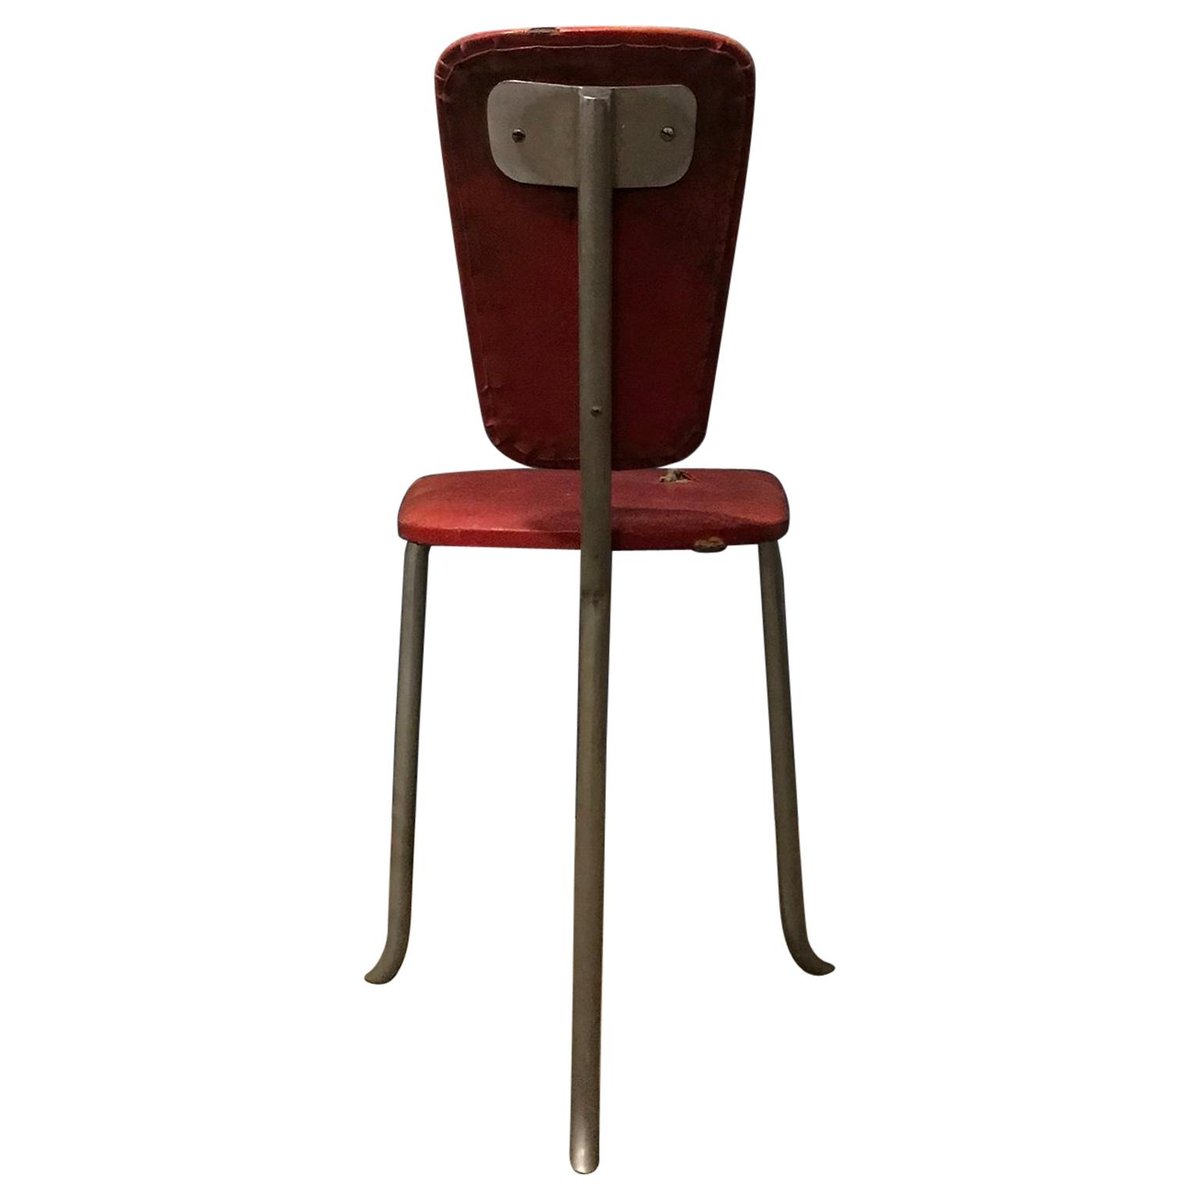 vintage red leatherette tripod side chair 1960s BO-417626